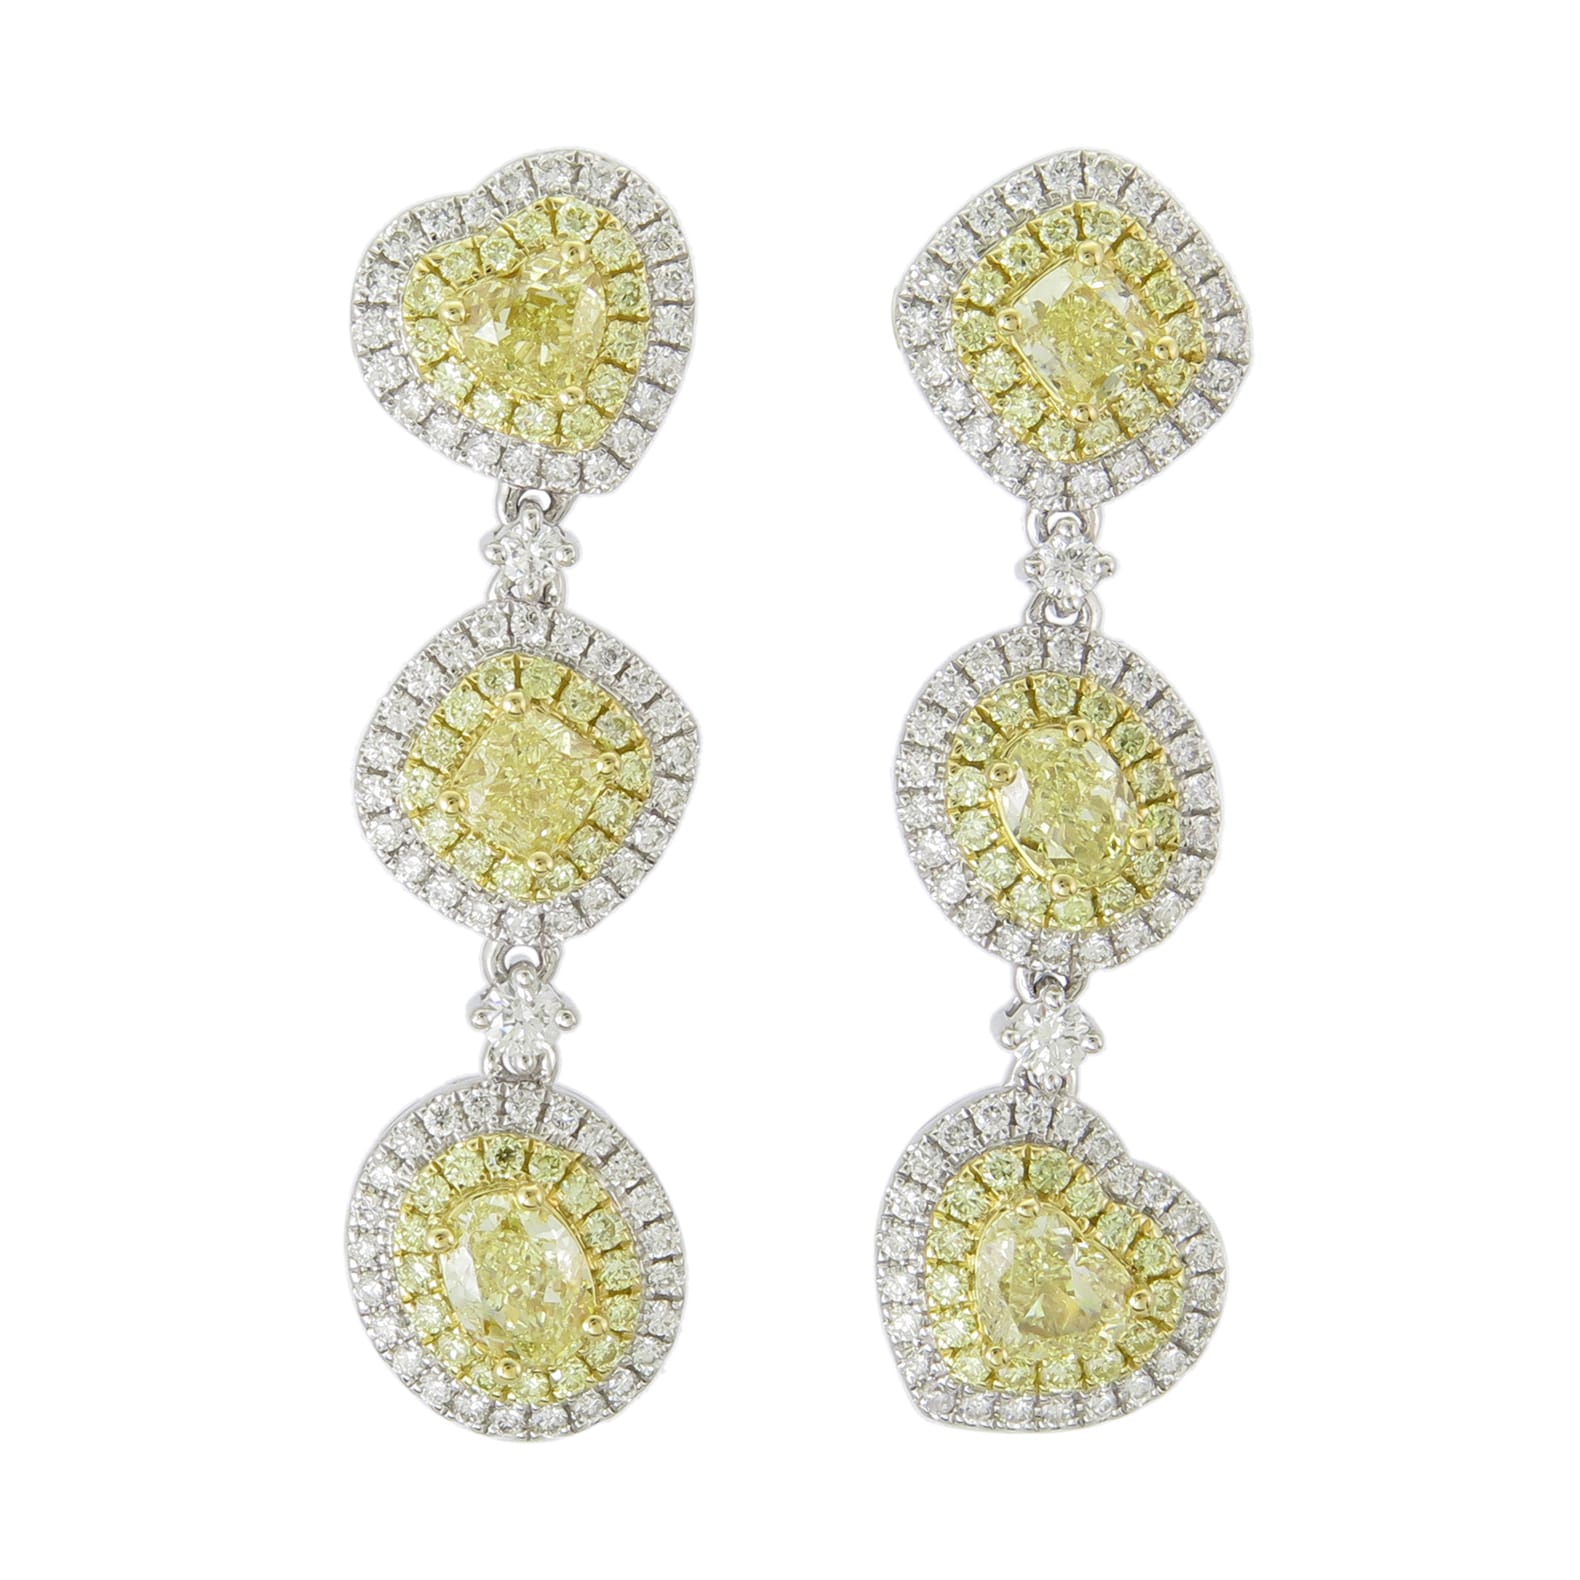 18ct White/Yellow Gold Earrings